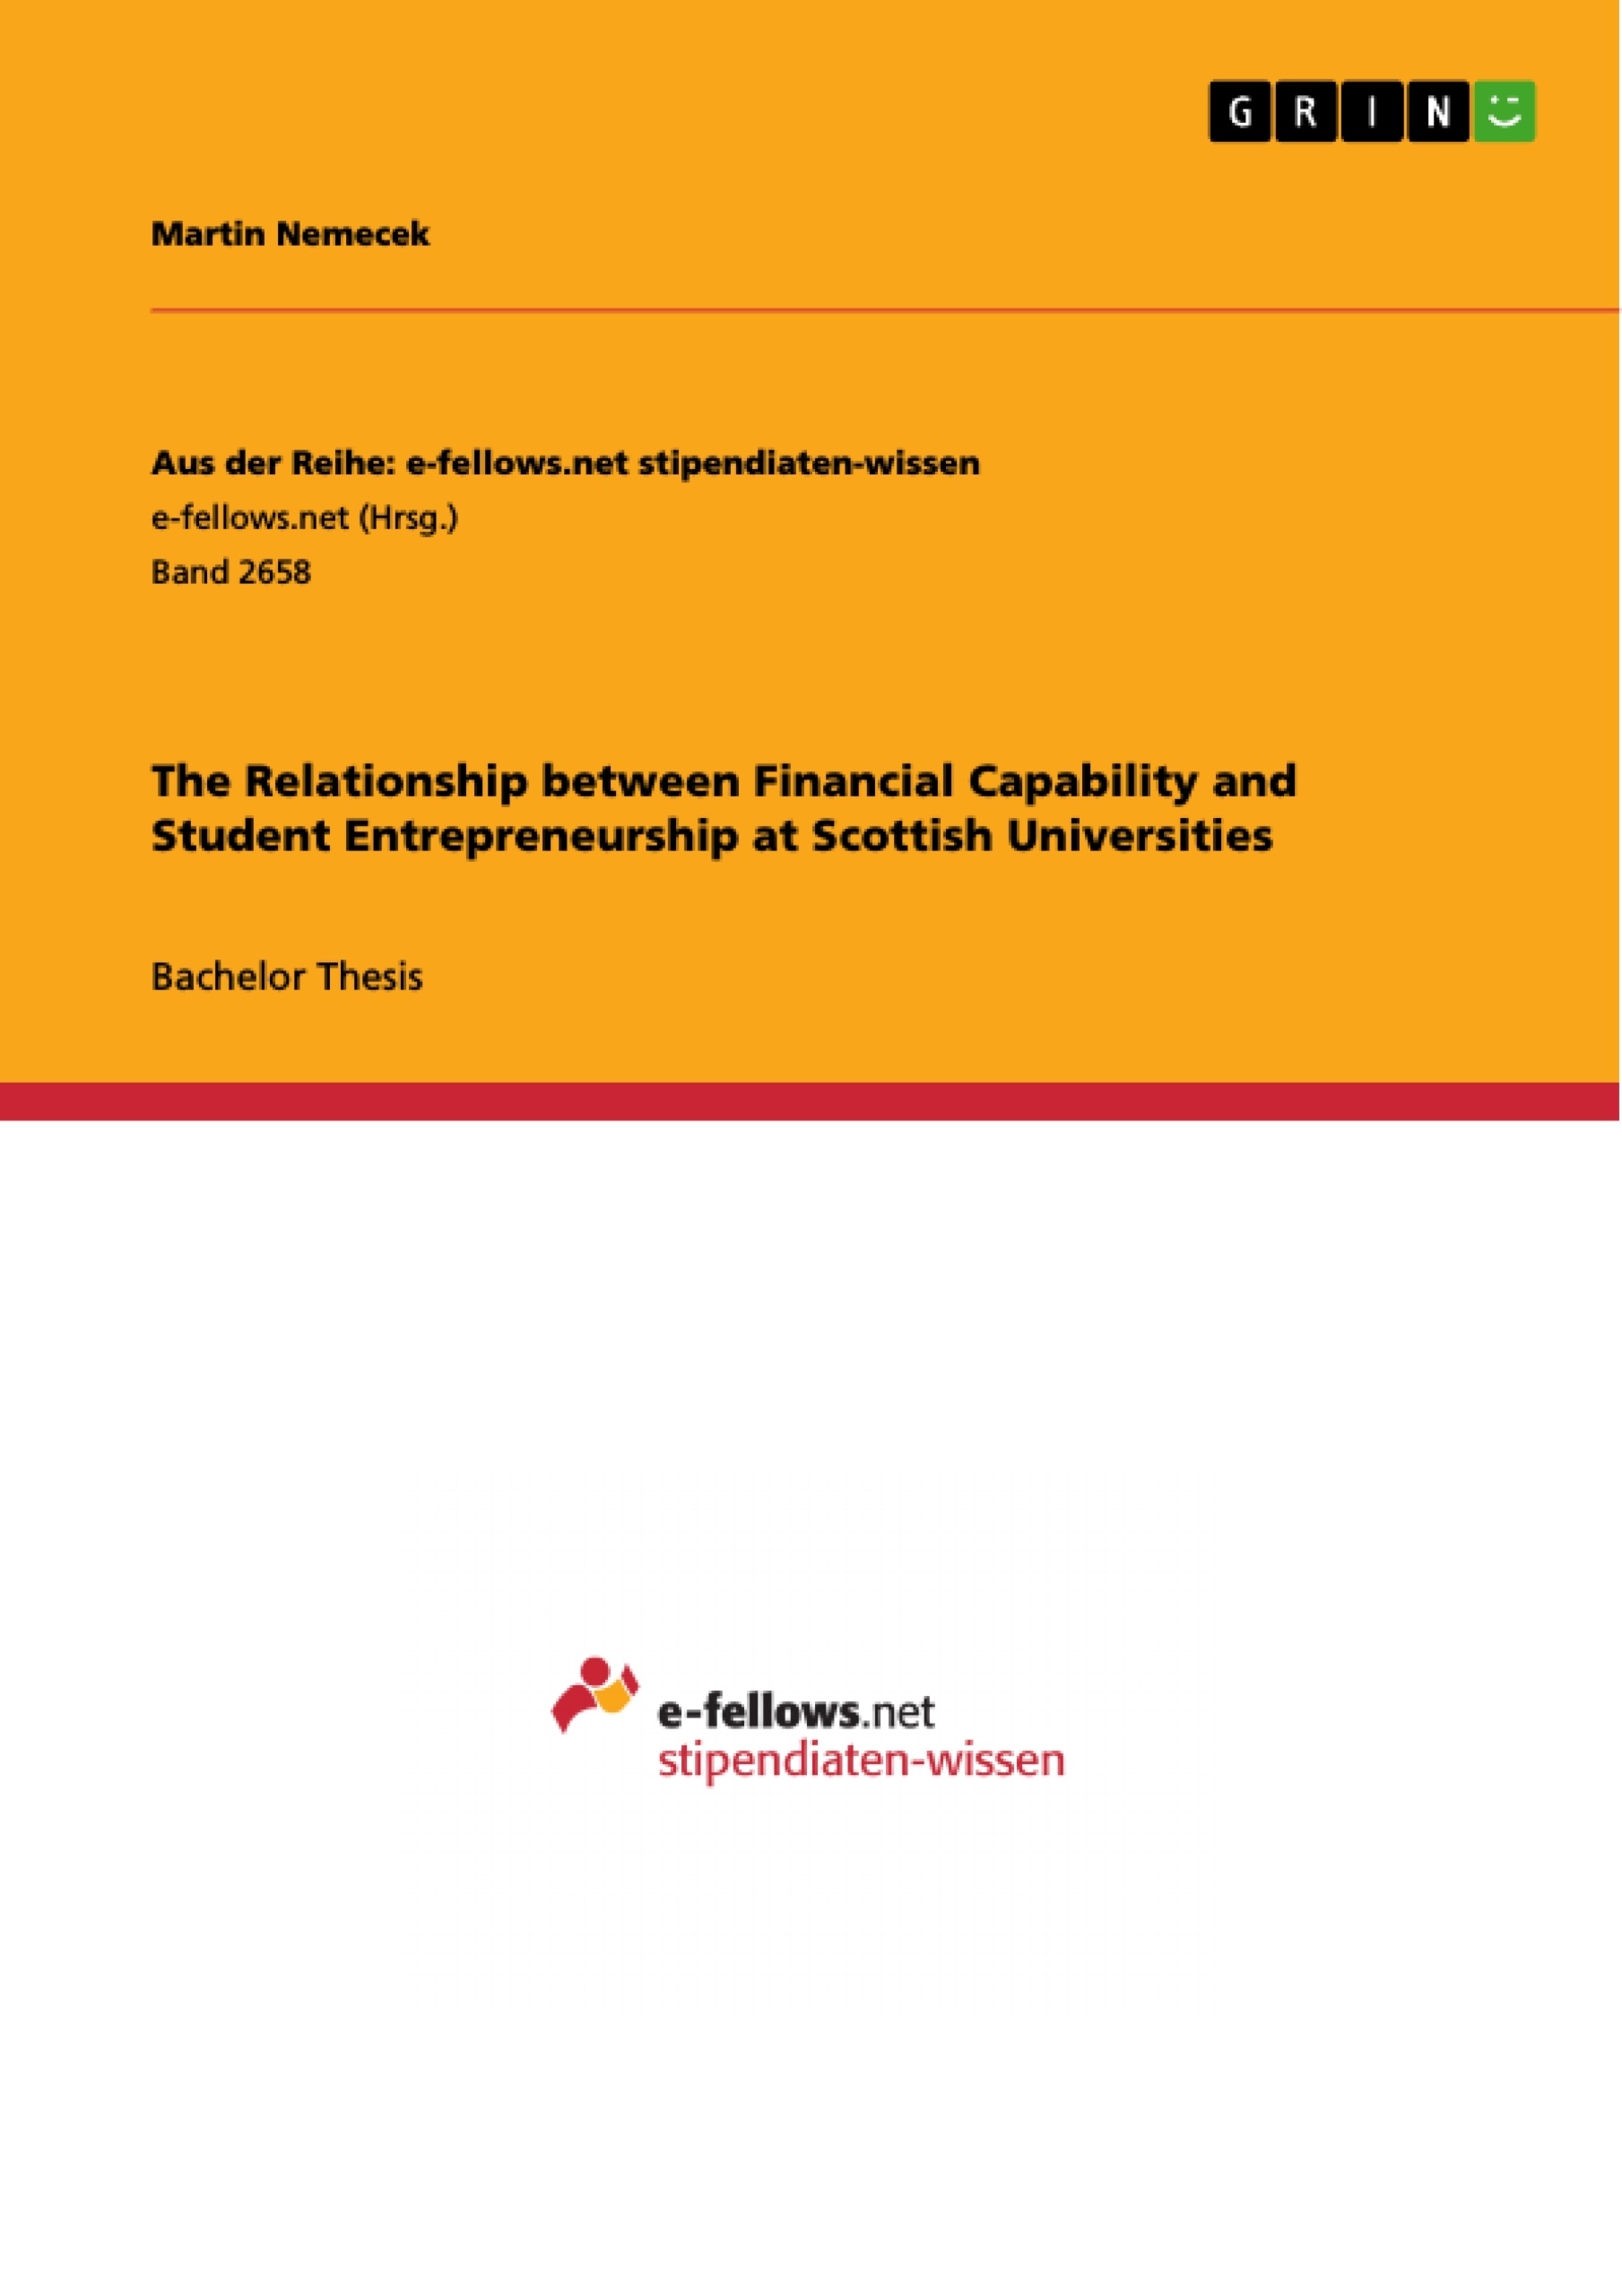 Titel: The Relationship between Financial Capability and Student Entrepreneurship at Scottish Universities